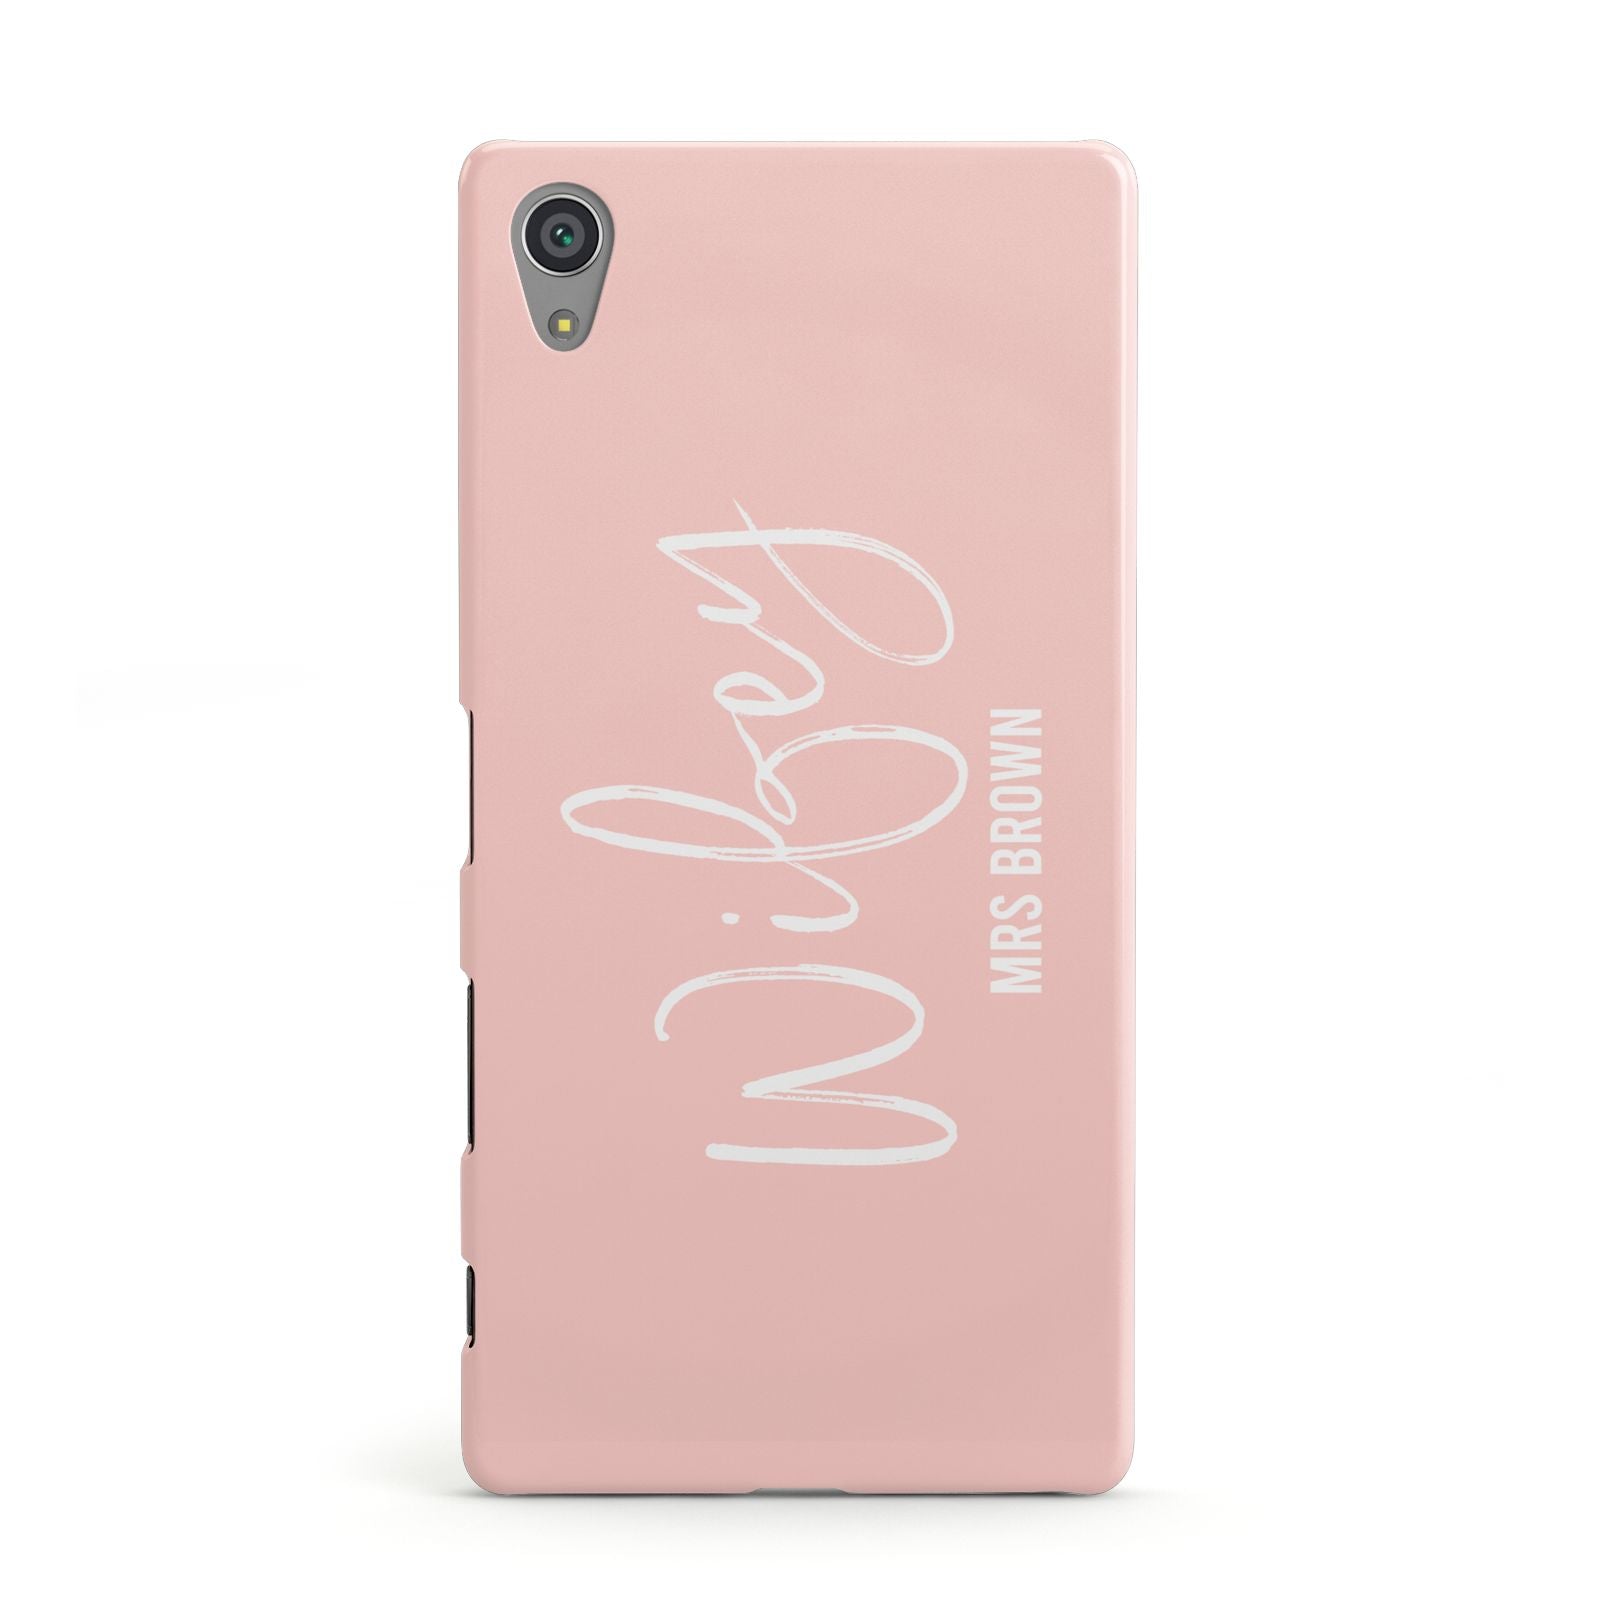 Personalised Wifey Pink Sony Xperia Case